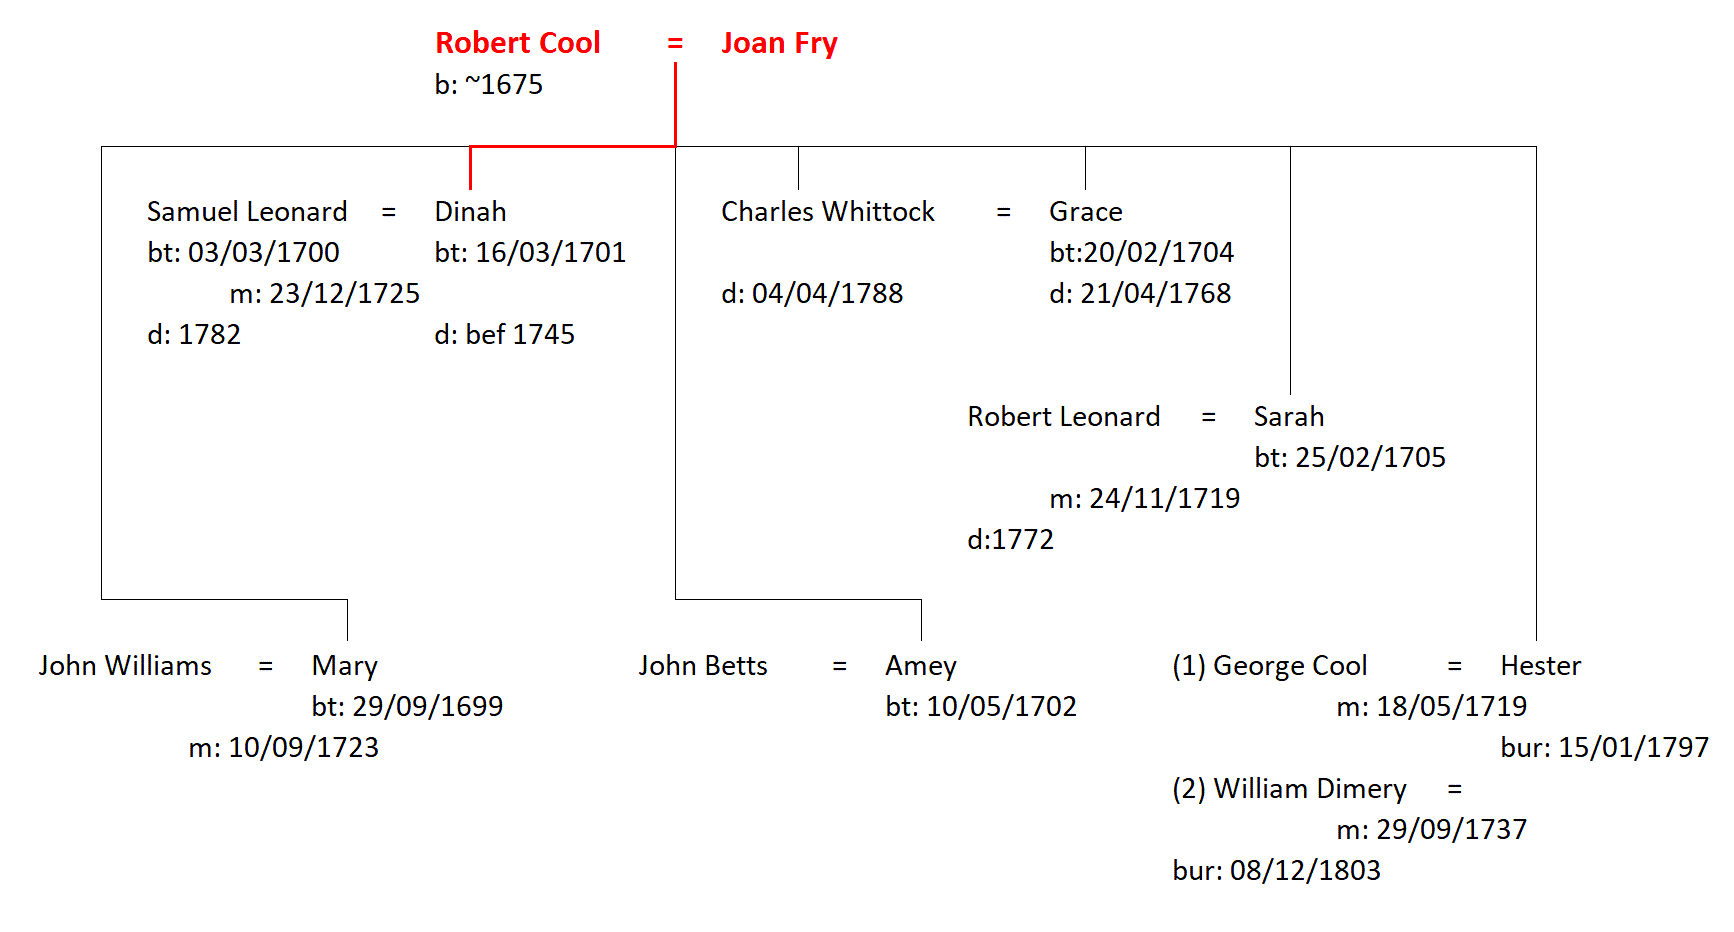 Figure 2: The Family of Robert and Joan Cool